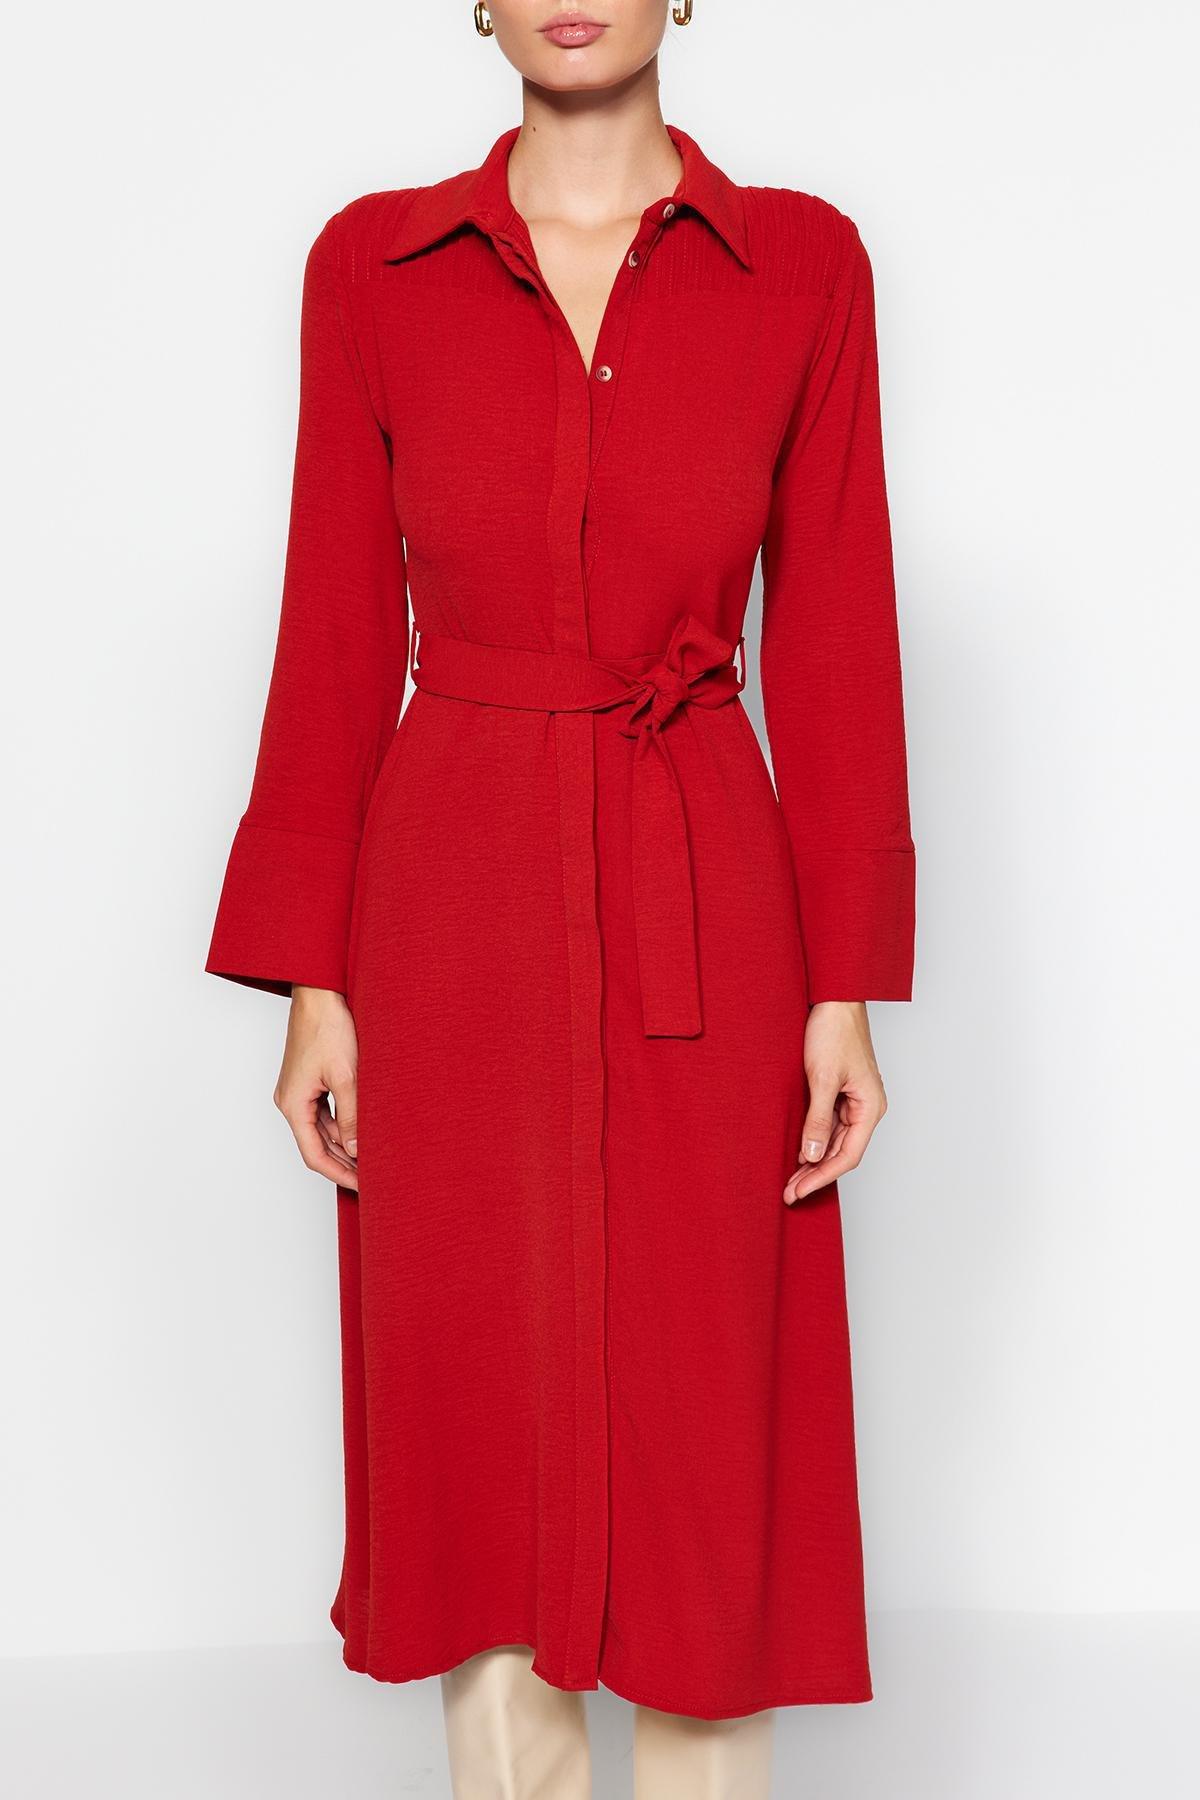 Trendyol - Red Belted Knitted Shirt Dress